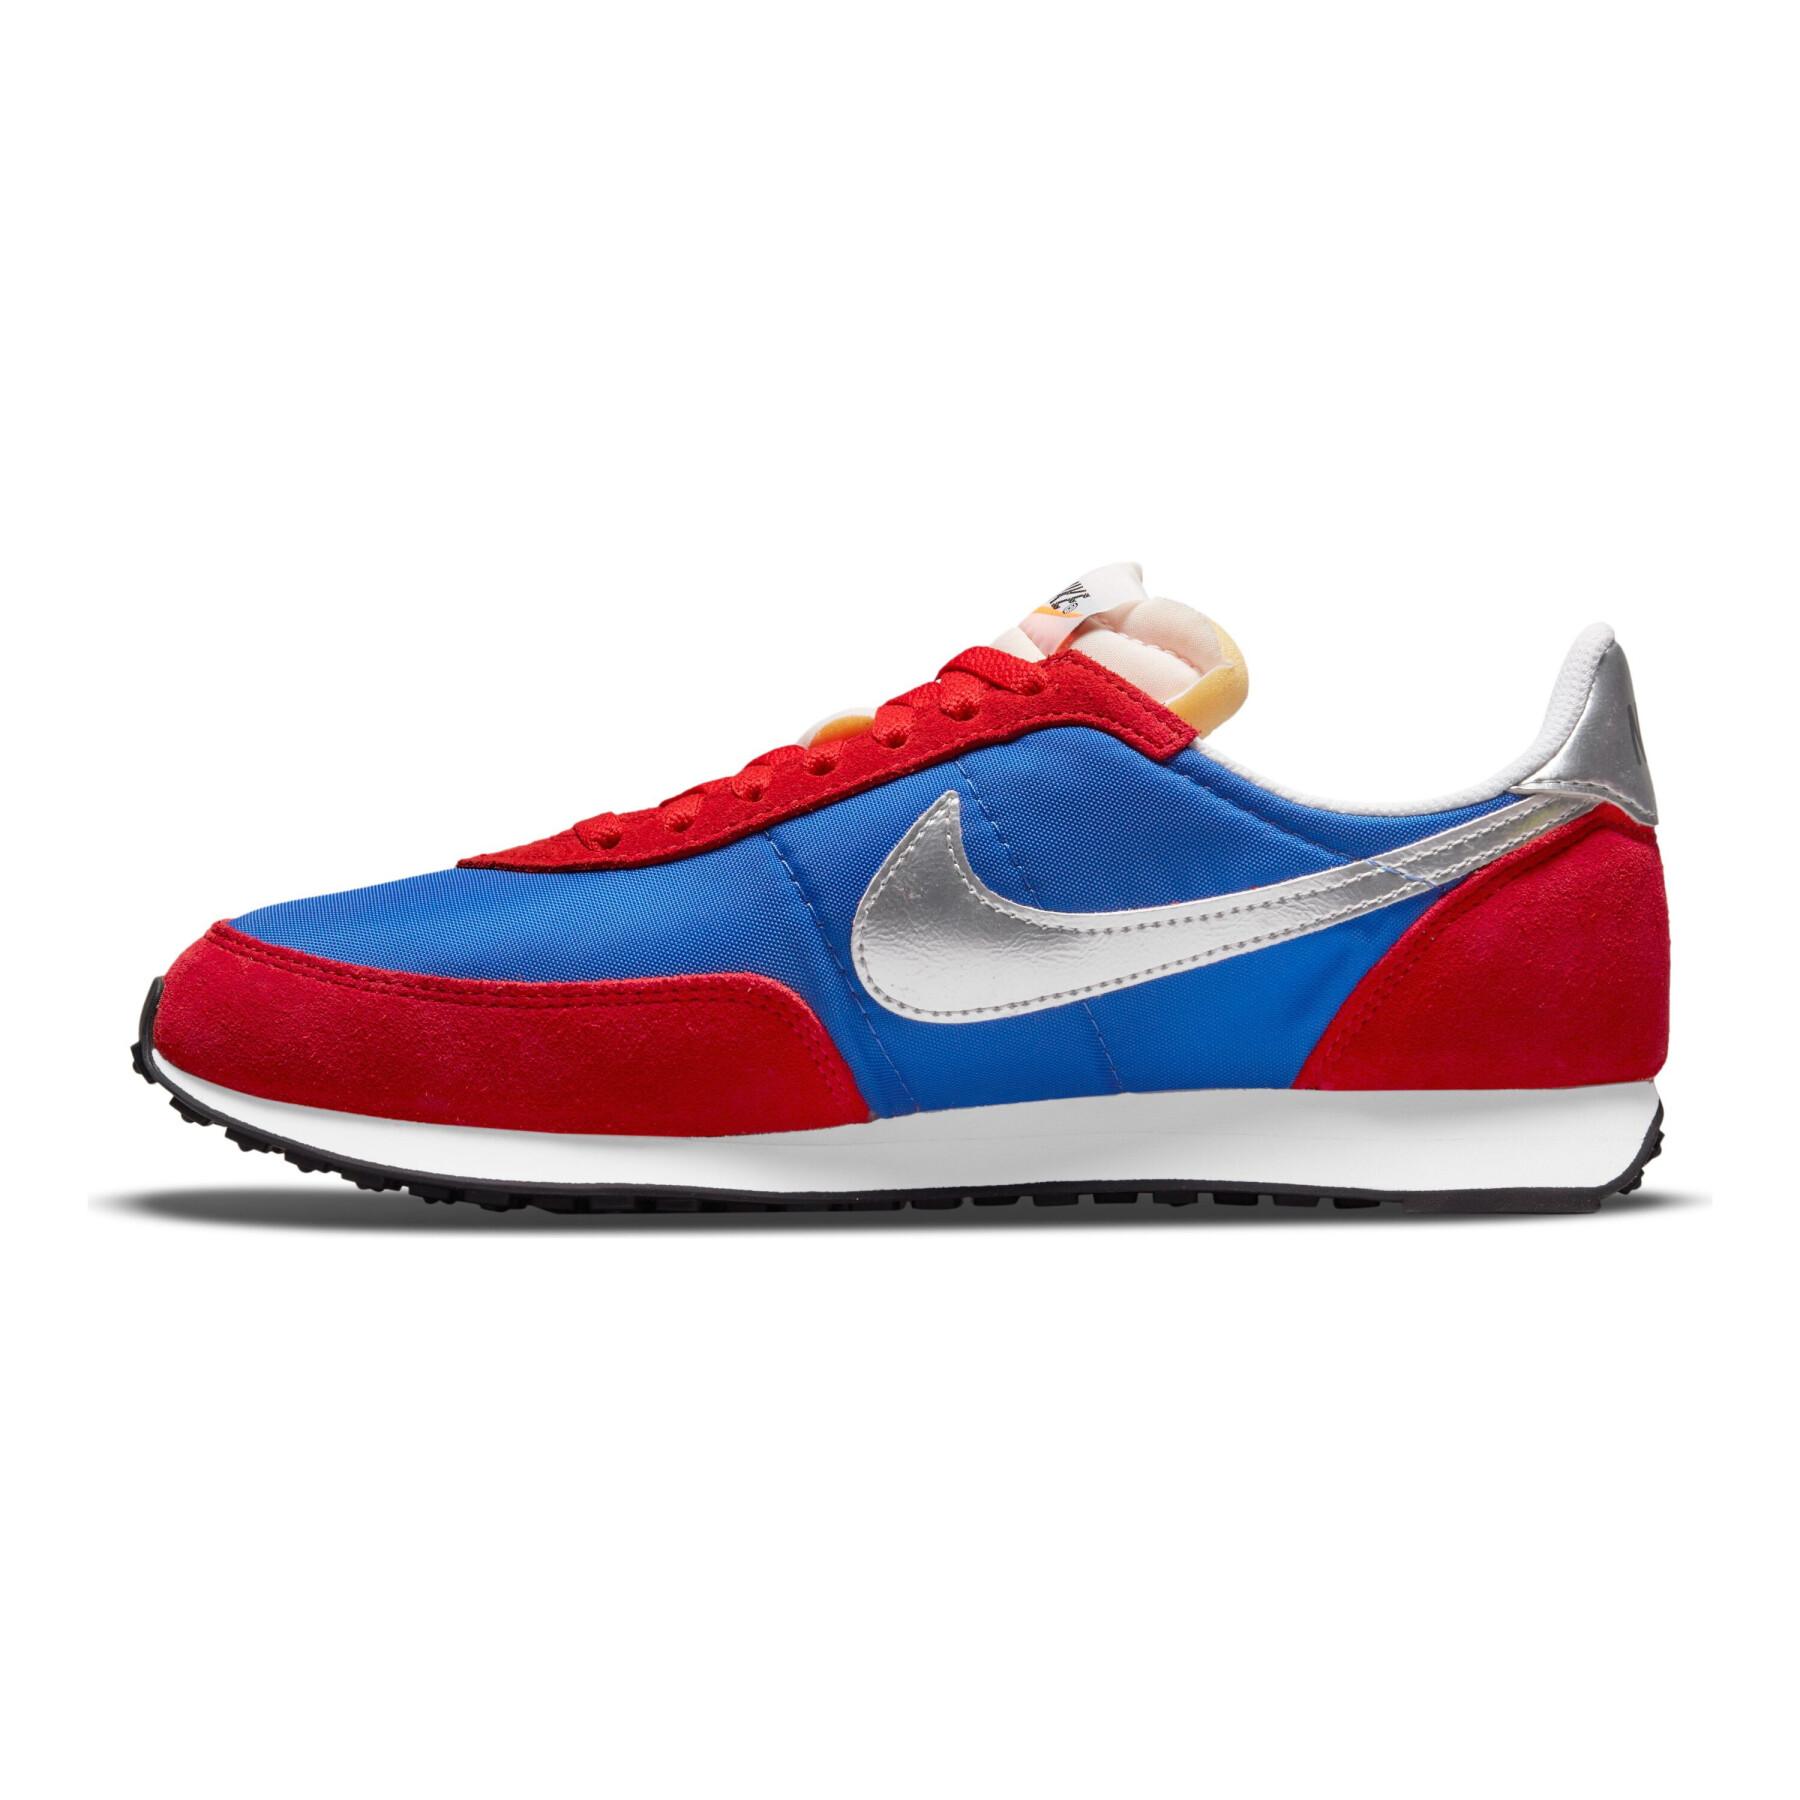 Formadores Nike Waffle Trainer 2 Sp